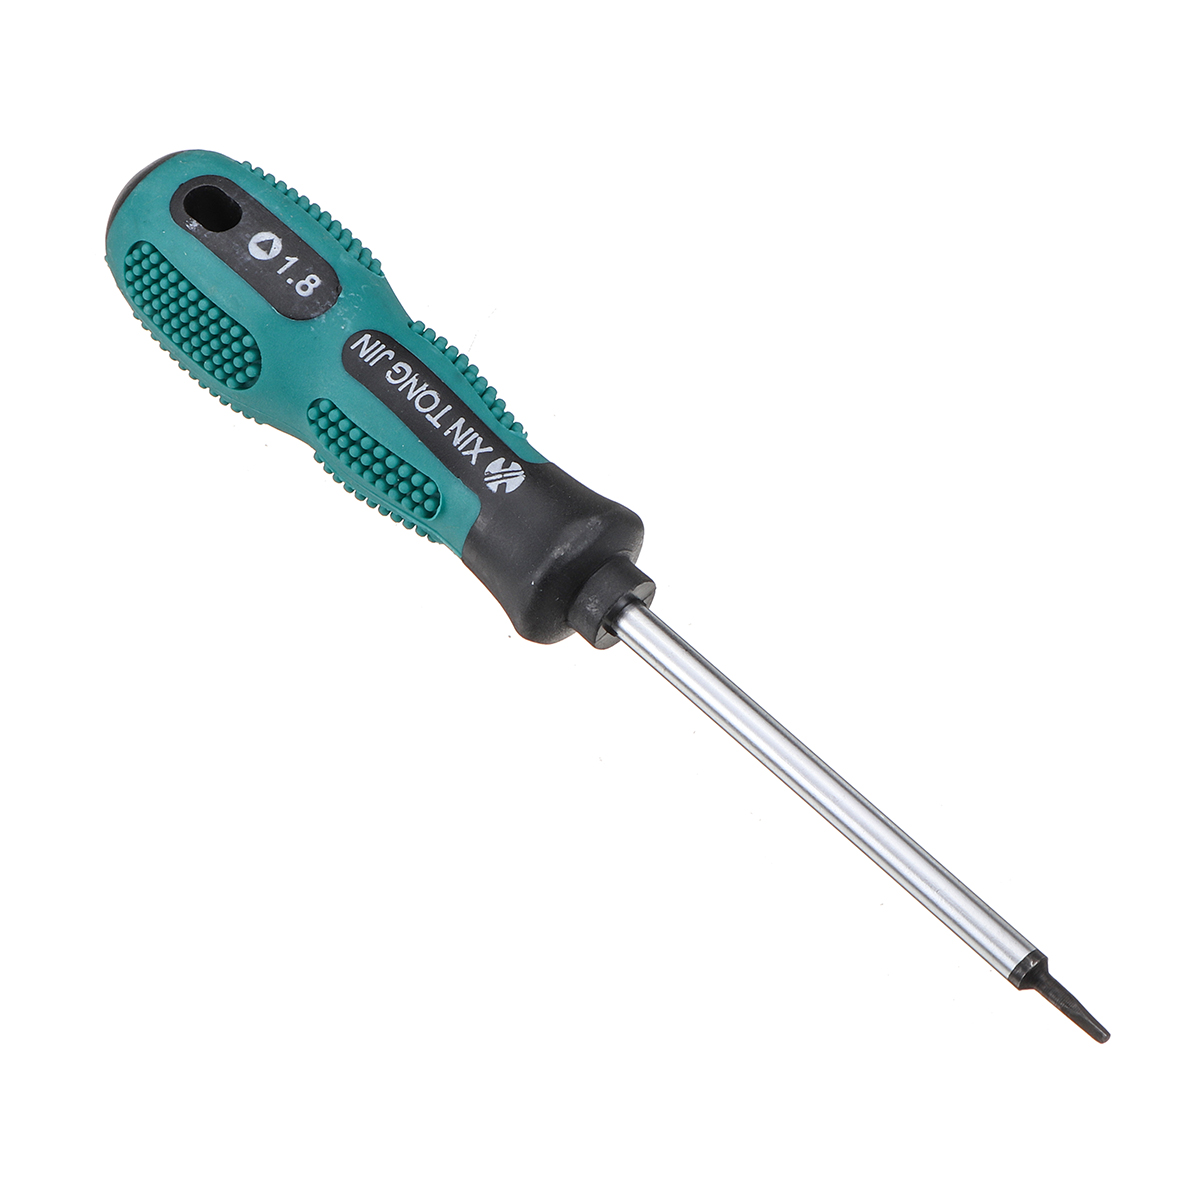 Portable-Insulated-Screwdriver-Magnetic-Bits-Watches-Toys-Repair-Tool-1553444-4